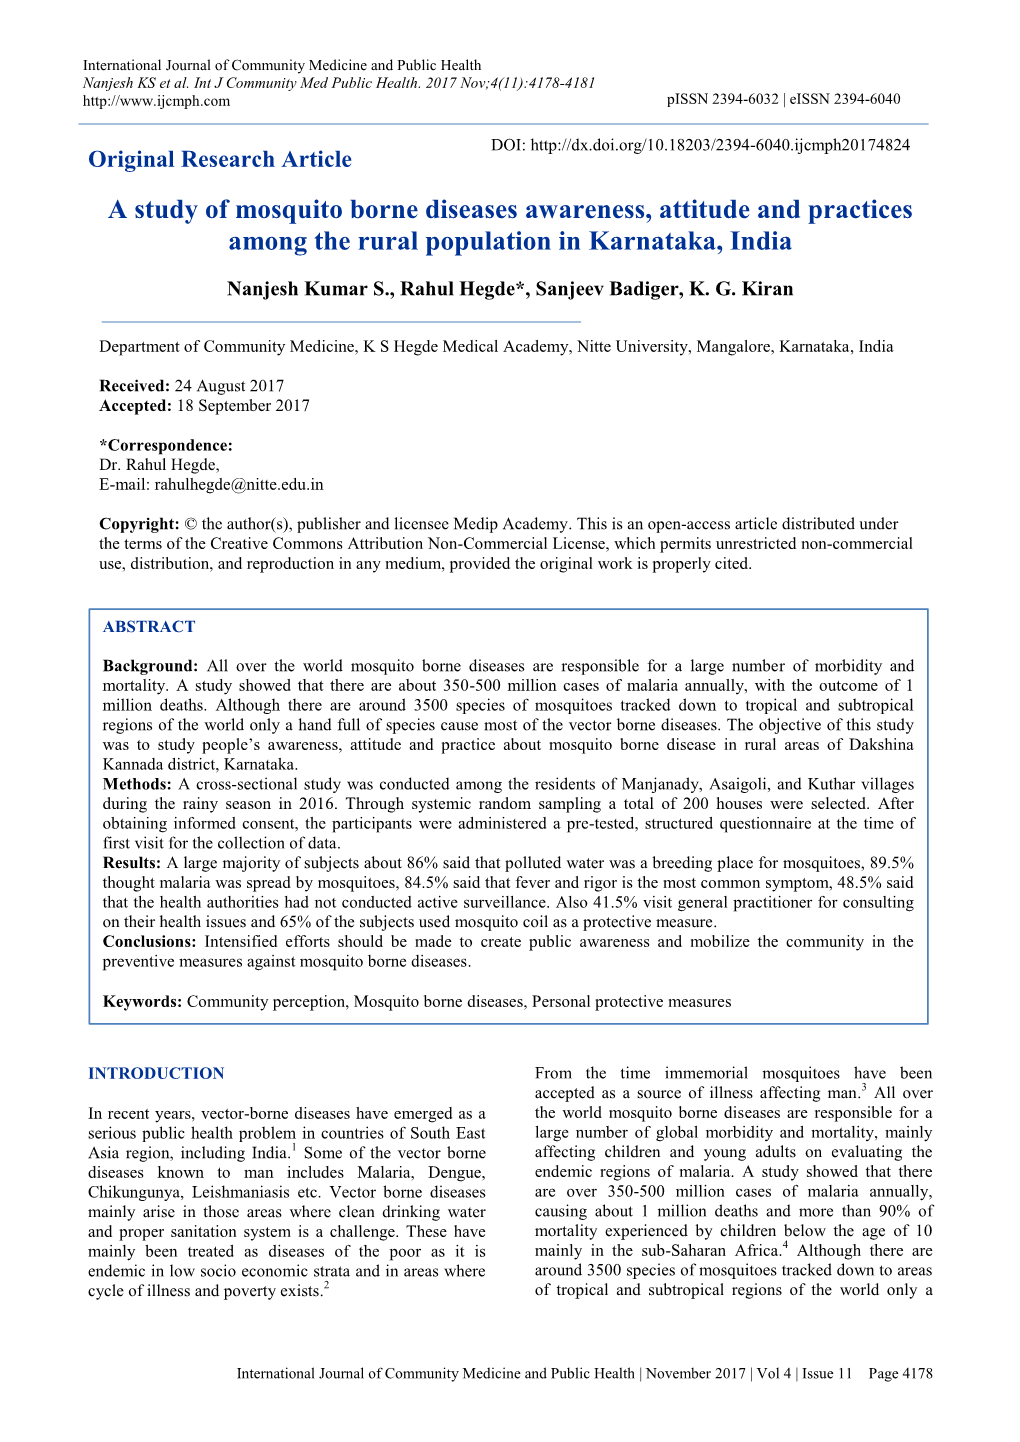 A Study of Mosquito Borne Diseases Awareness, Attitude and Practices Among the Rural Population in Karnataka, India